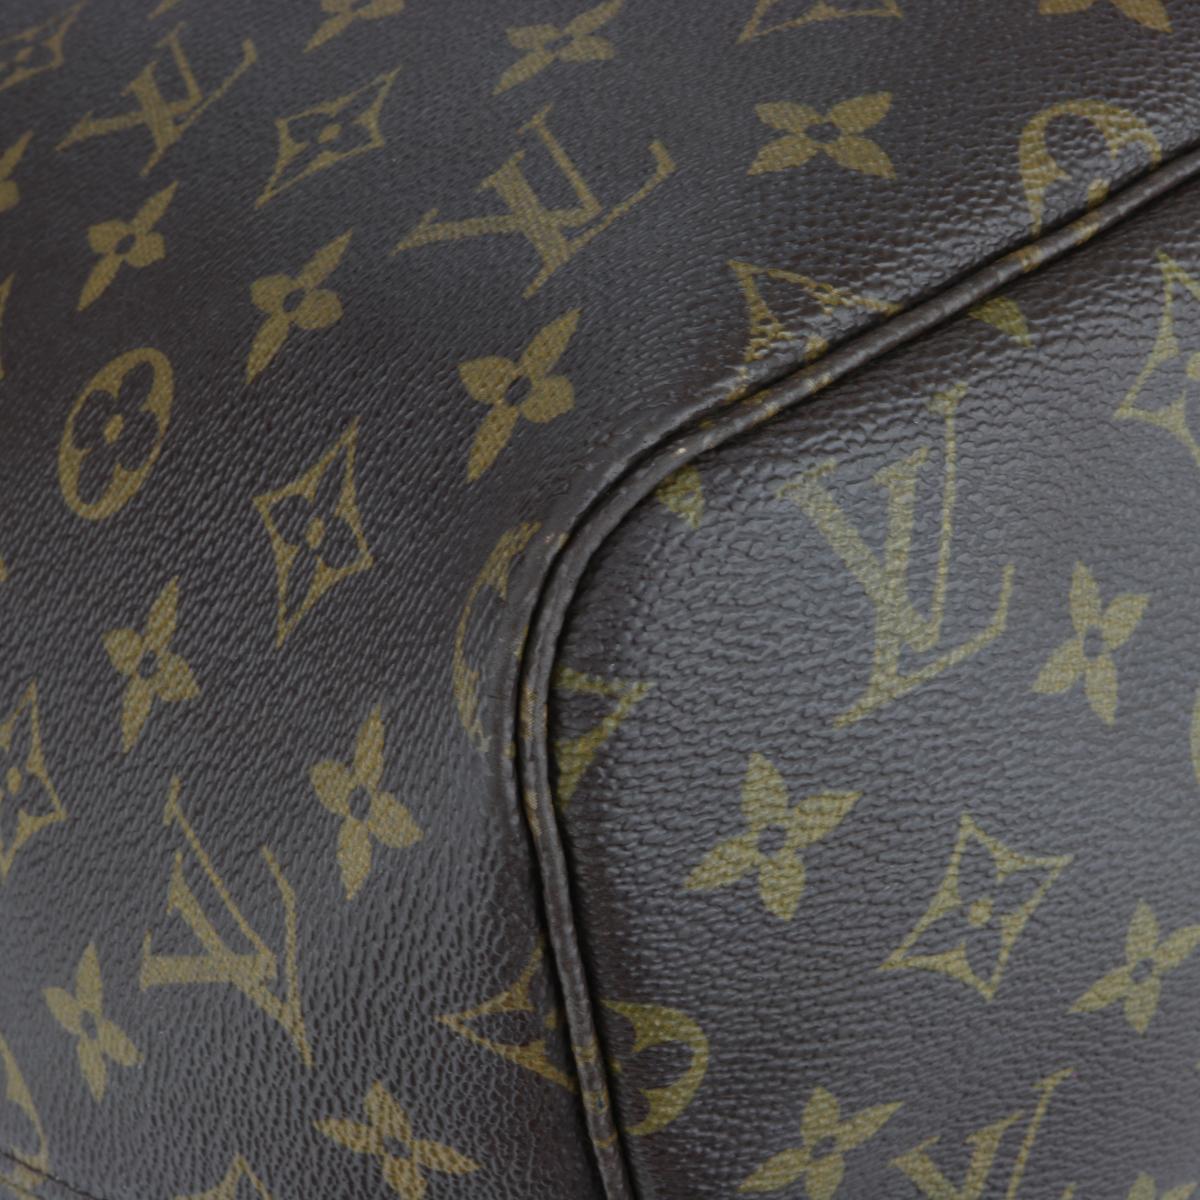 Louis Vuitton Neverfull GM Bag in Monogram with Beige Interior 2007 4